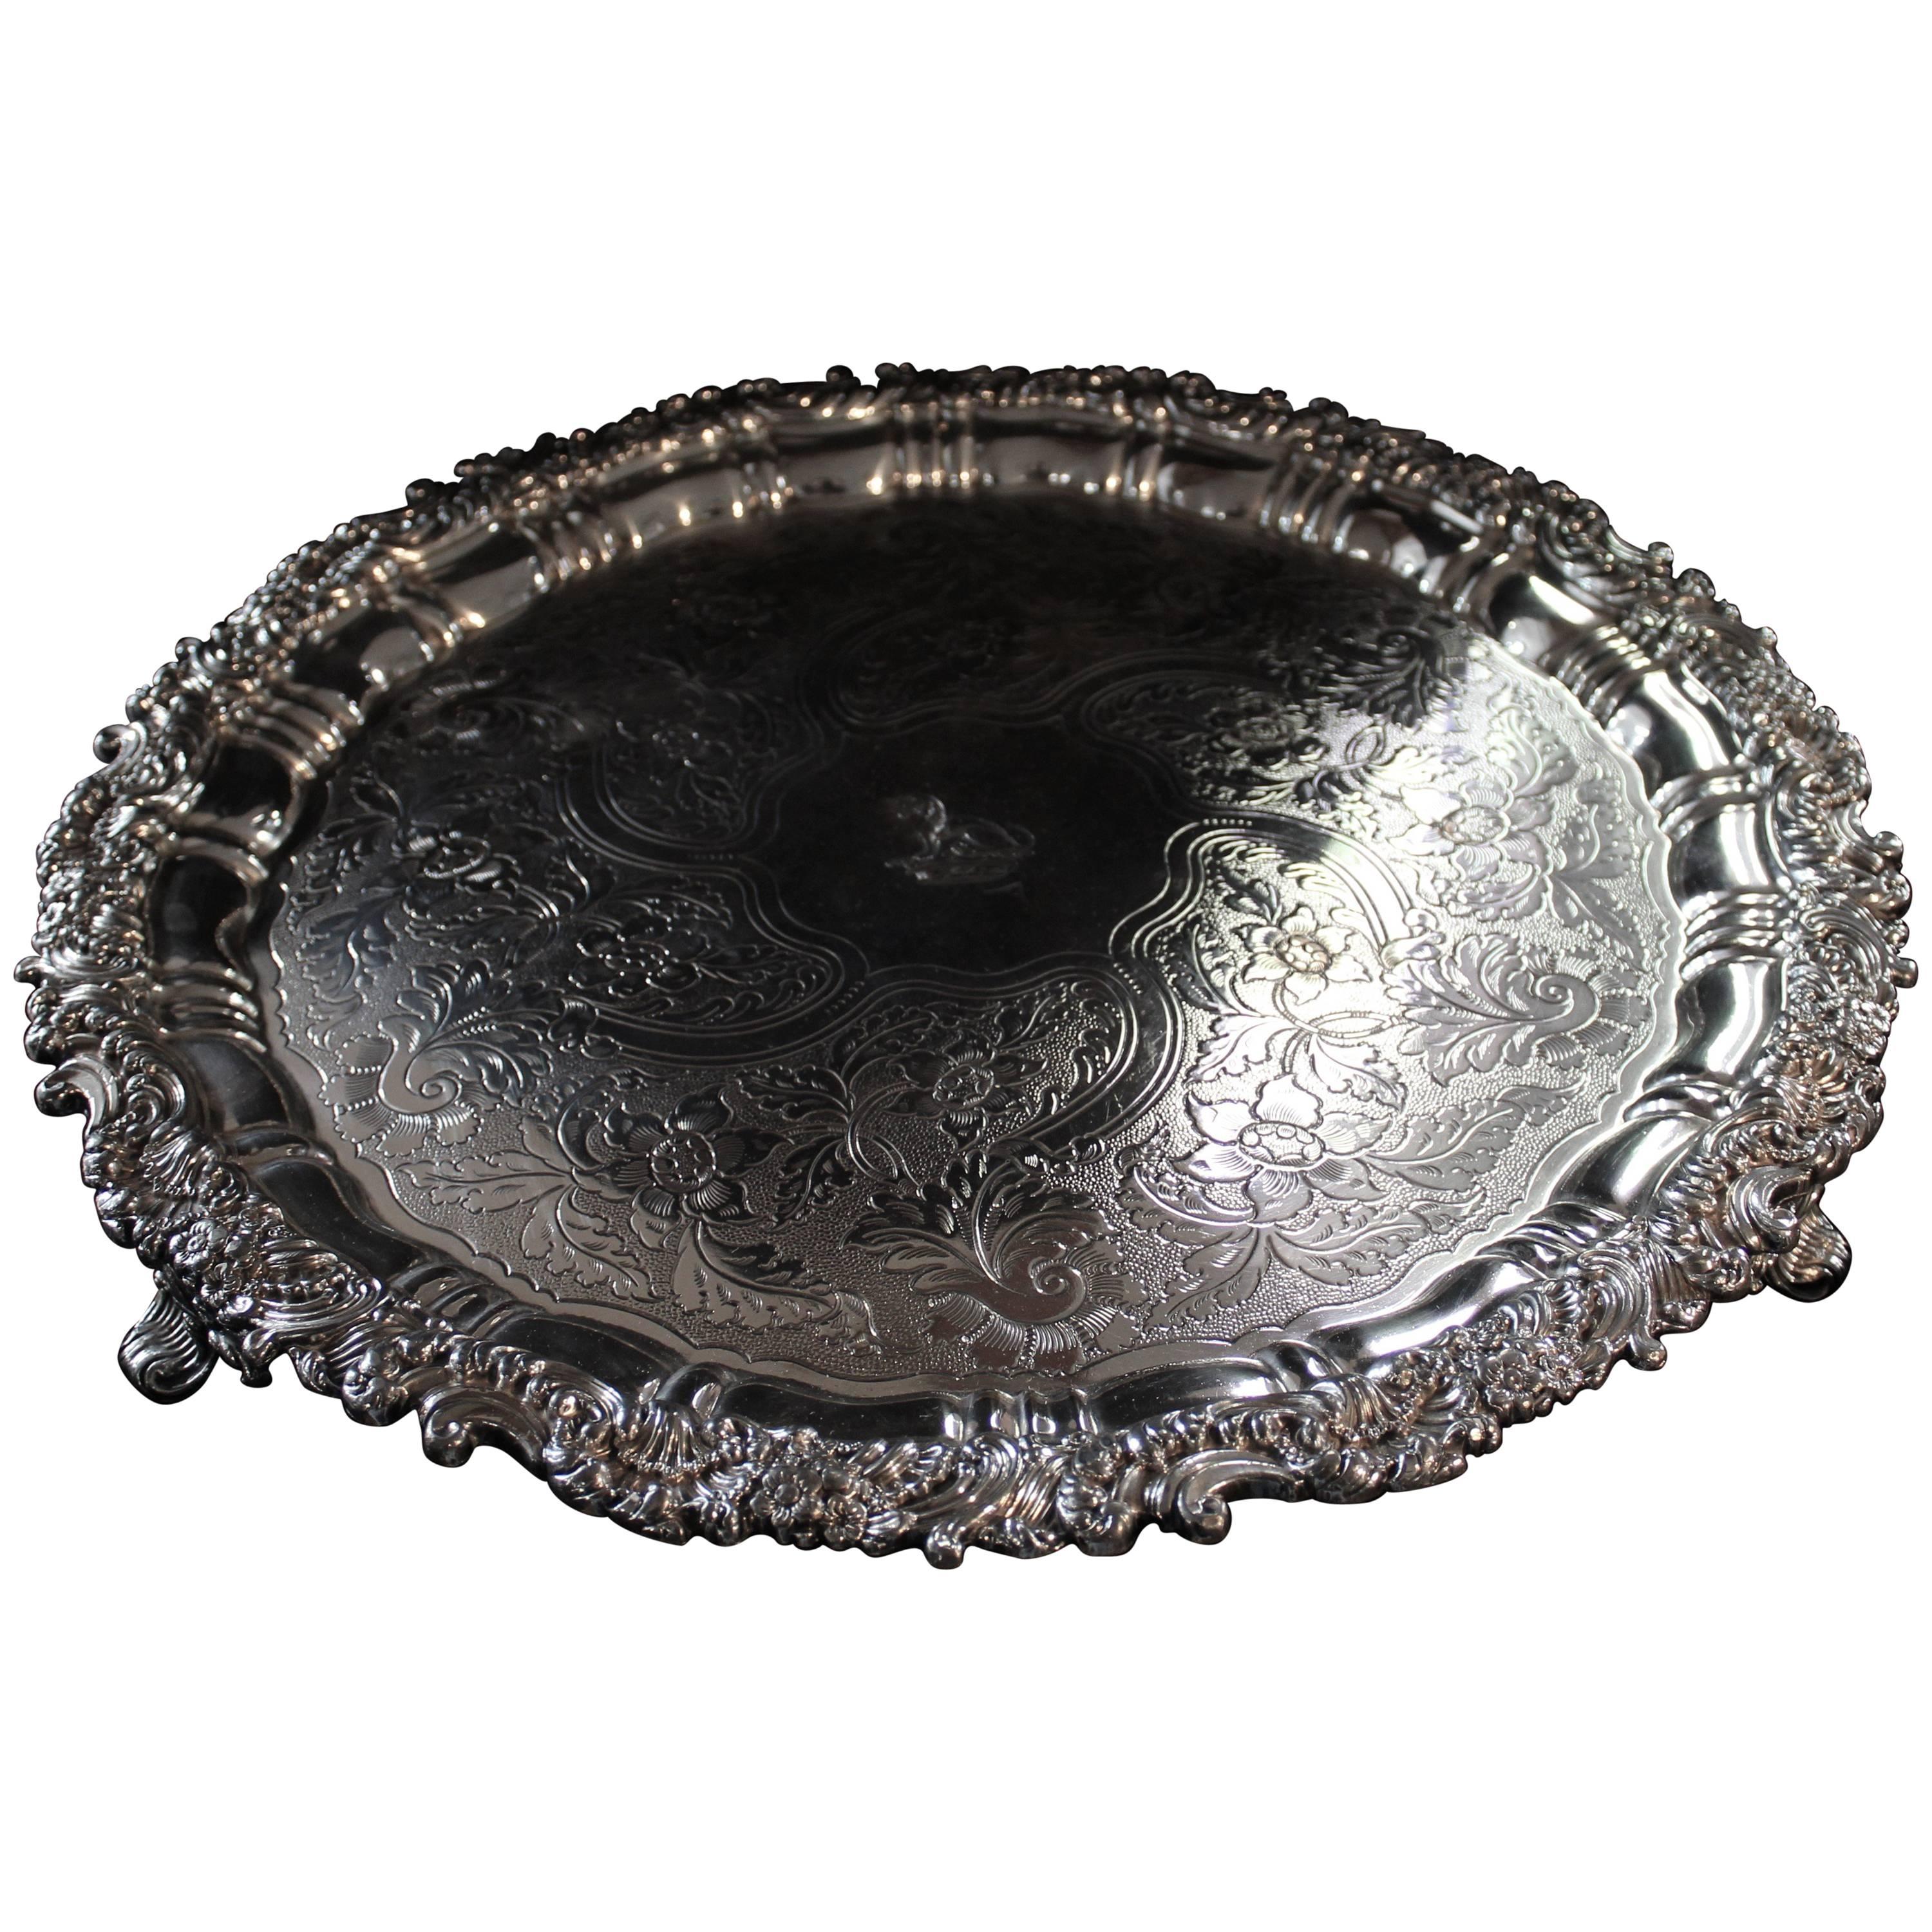 Sheffield Silver Plated Crested Salver Early 19th Century